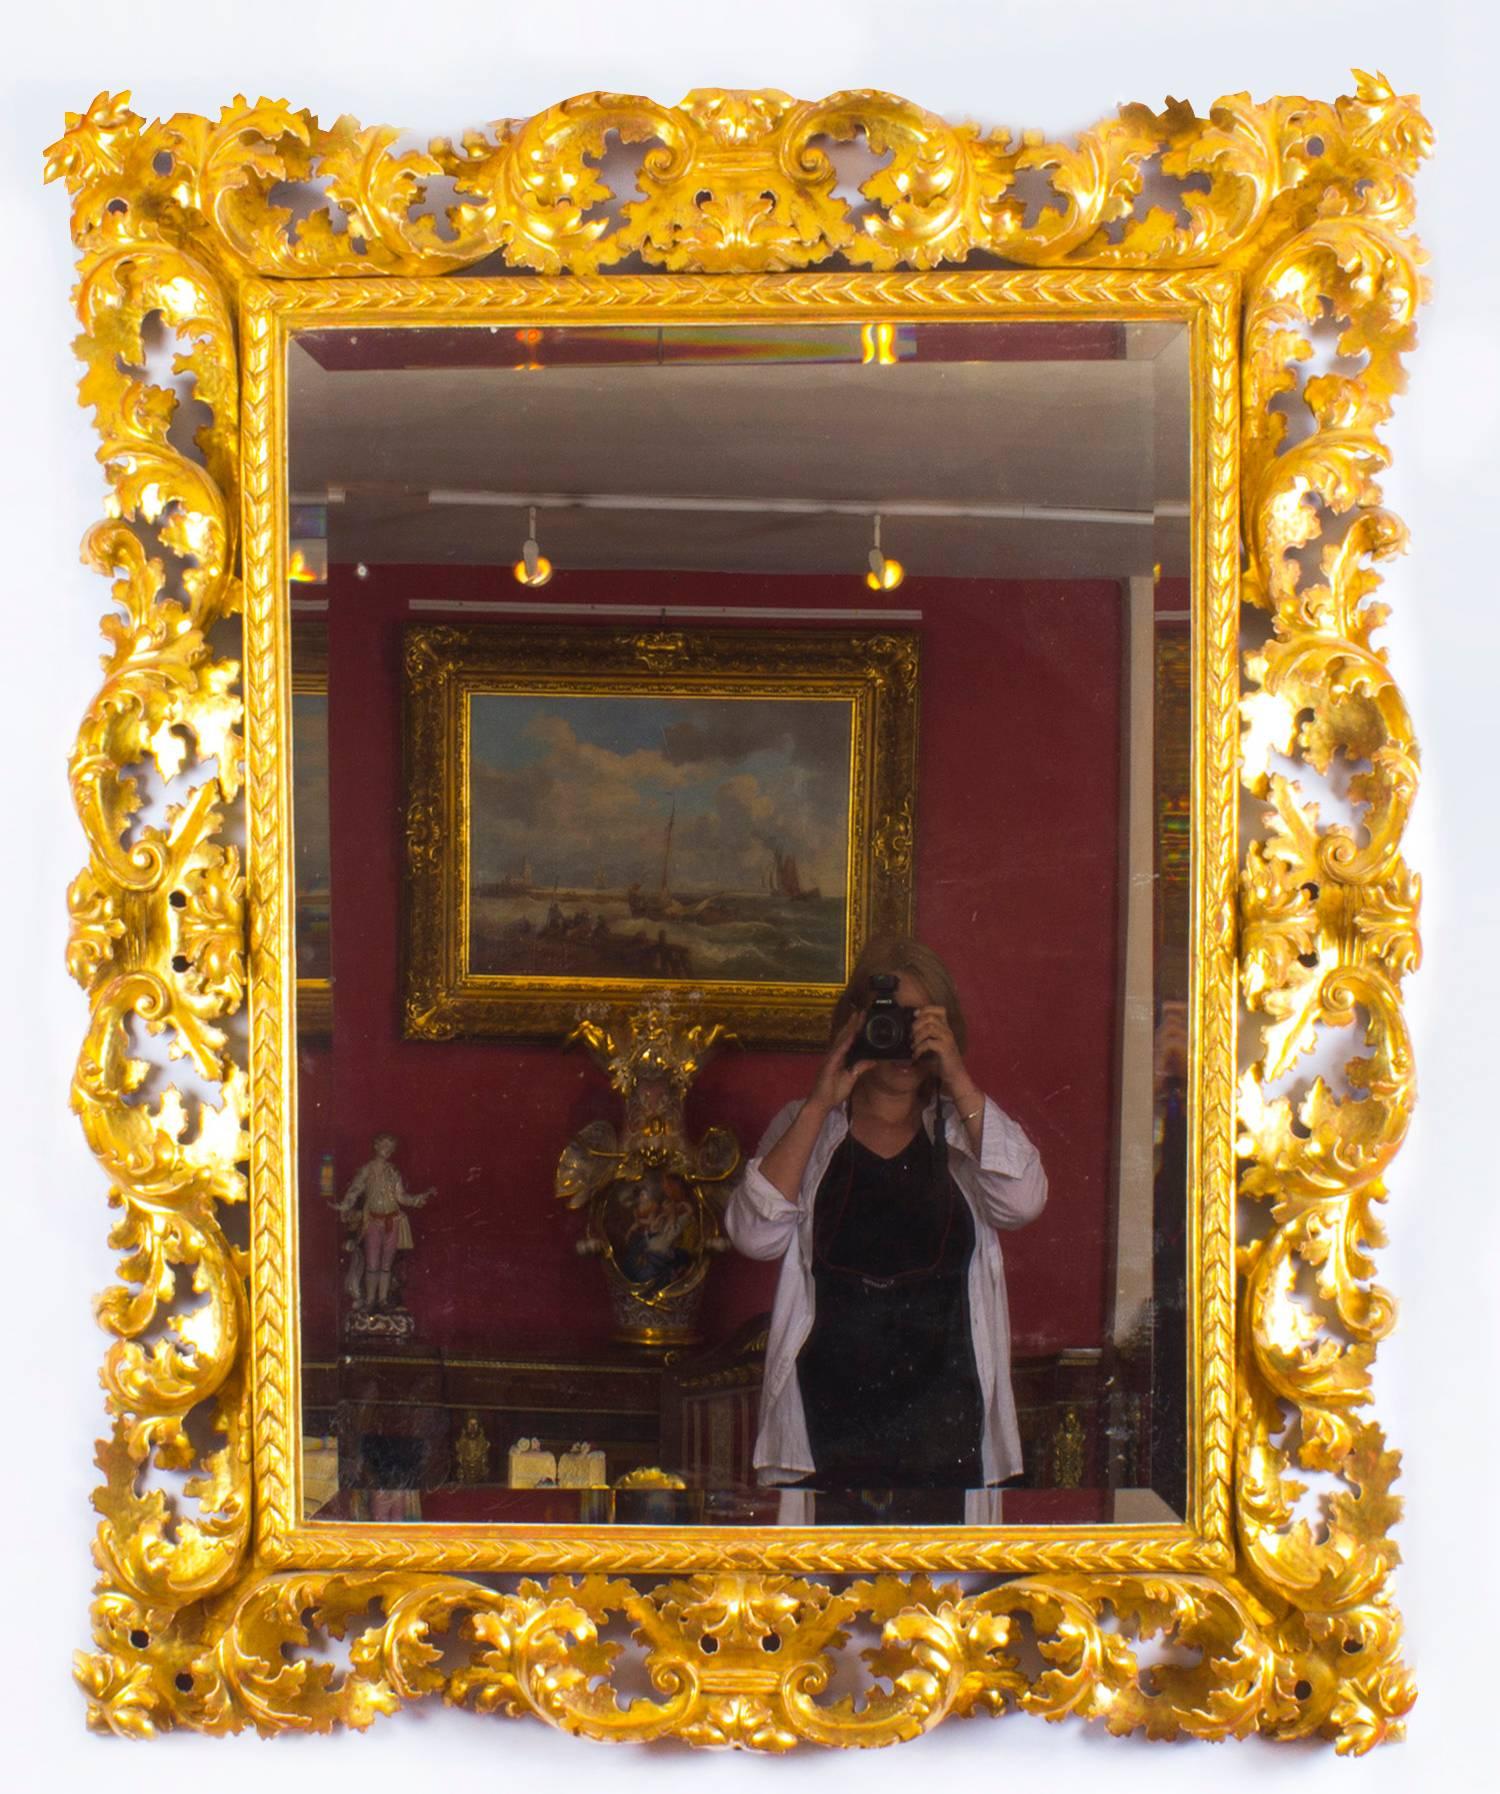 A superbly carved and highly decorative fine museum quality Florentine giltwood overmantle mirror, mid-19th century in date.
 
This rectangular mirror consists of a superbly carved giltwood frame with an arrow beaded border with scrolling acanthus